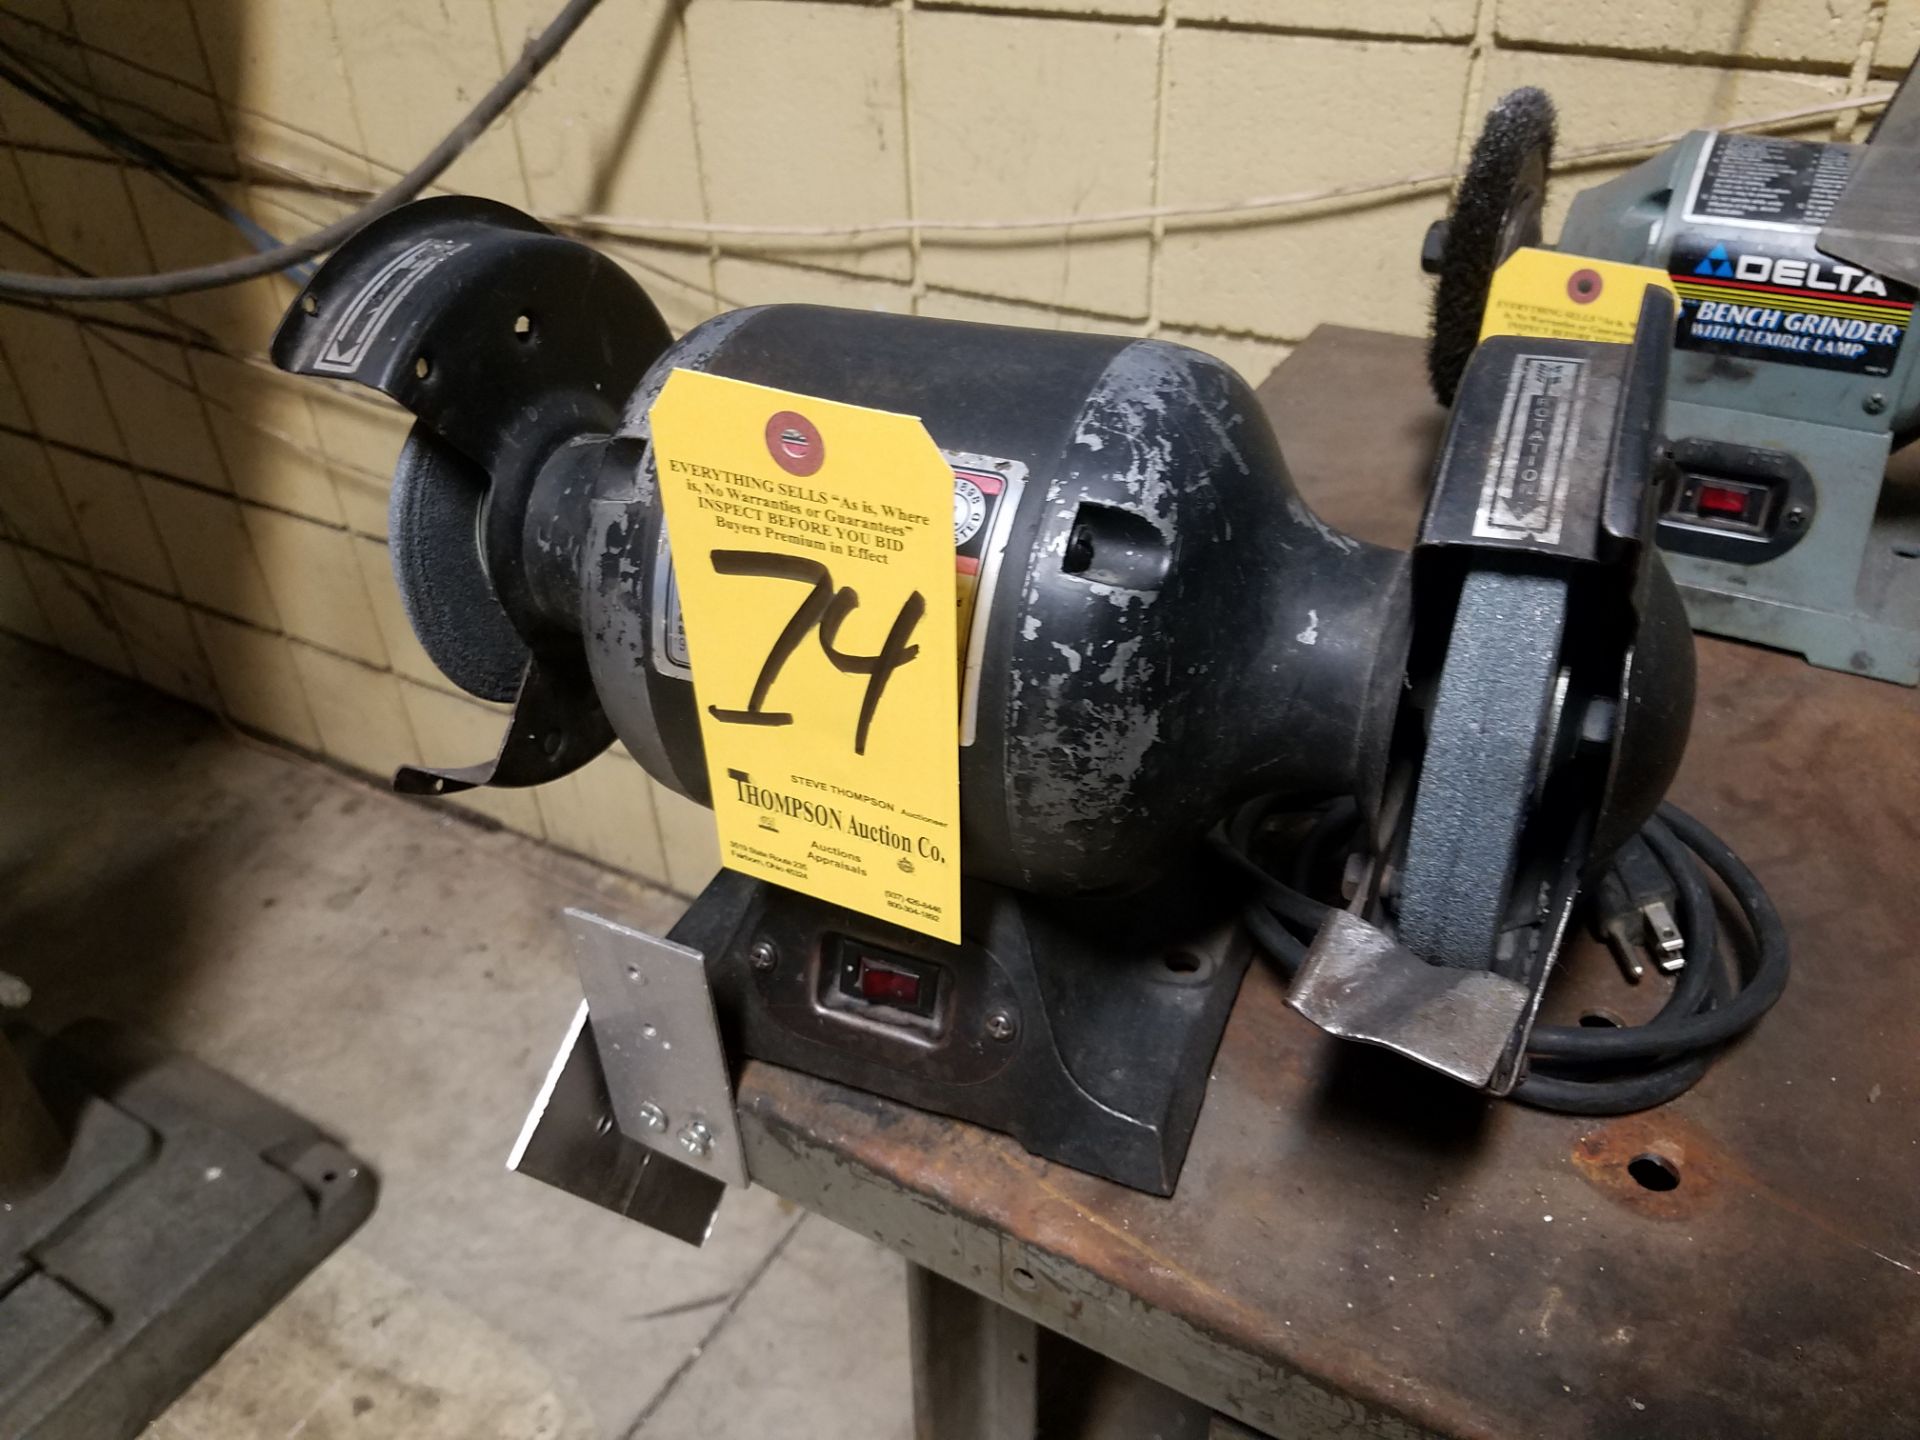 6 Inch Double End Bench Grinder